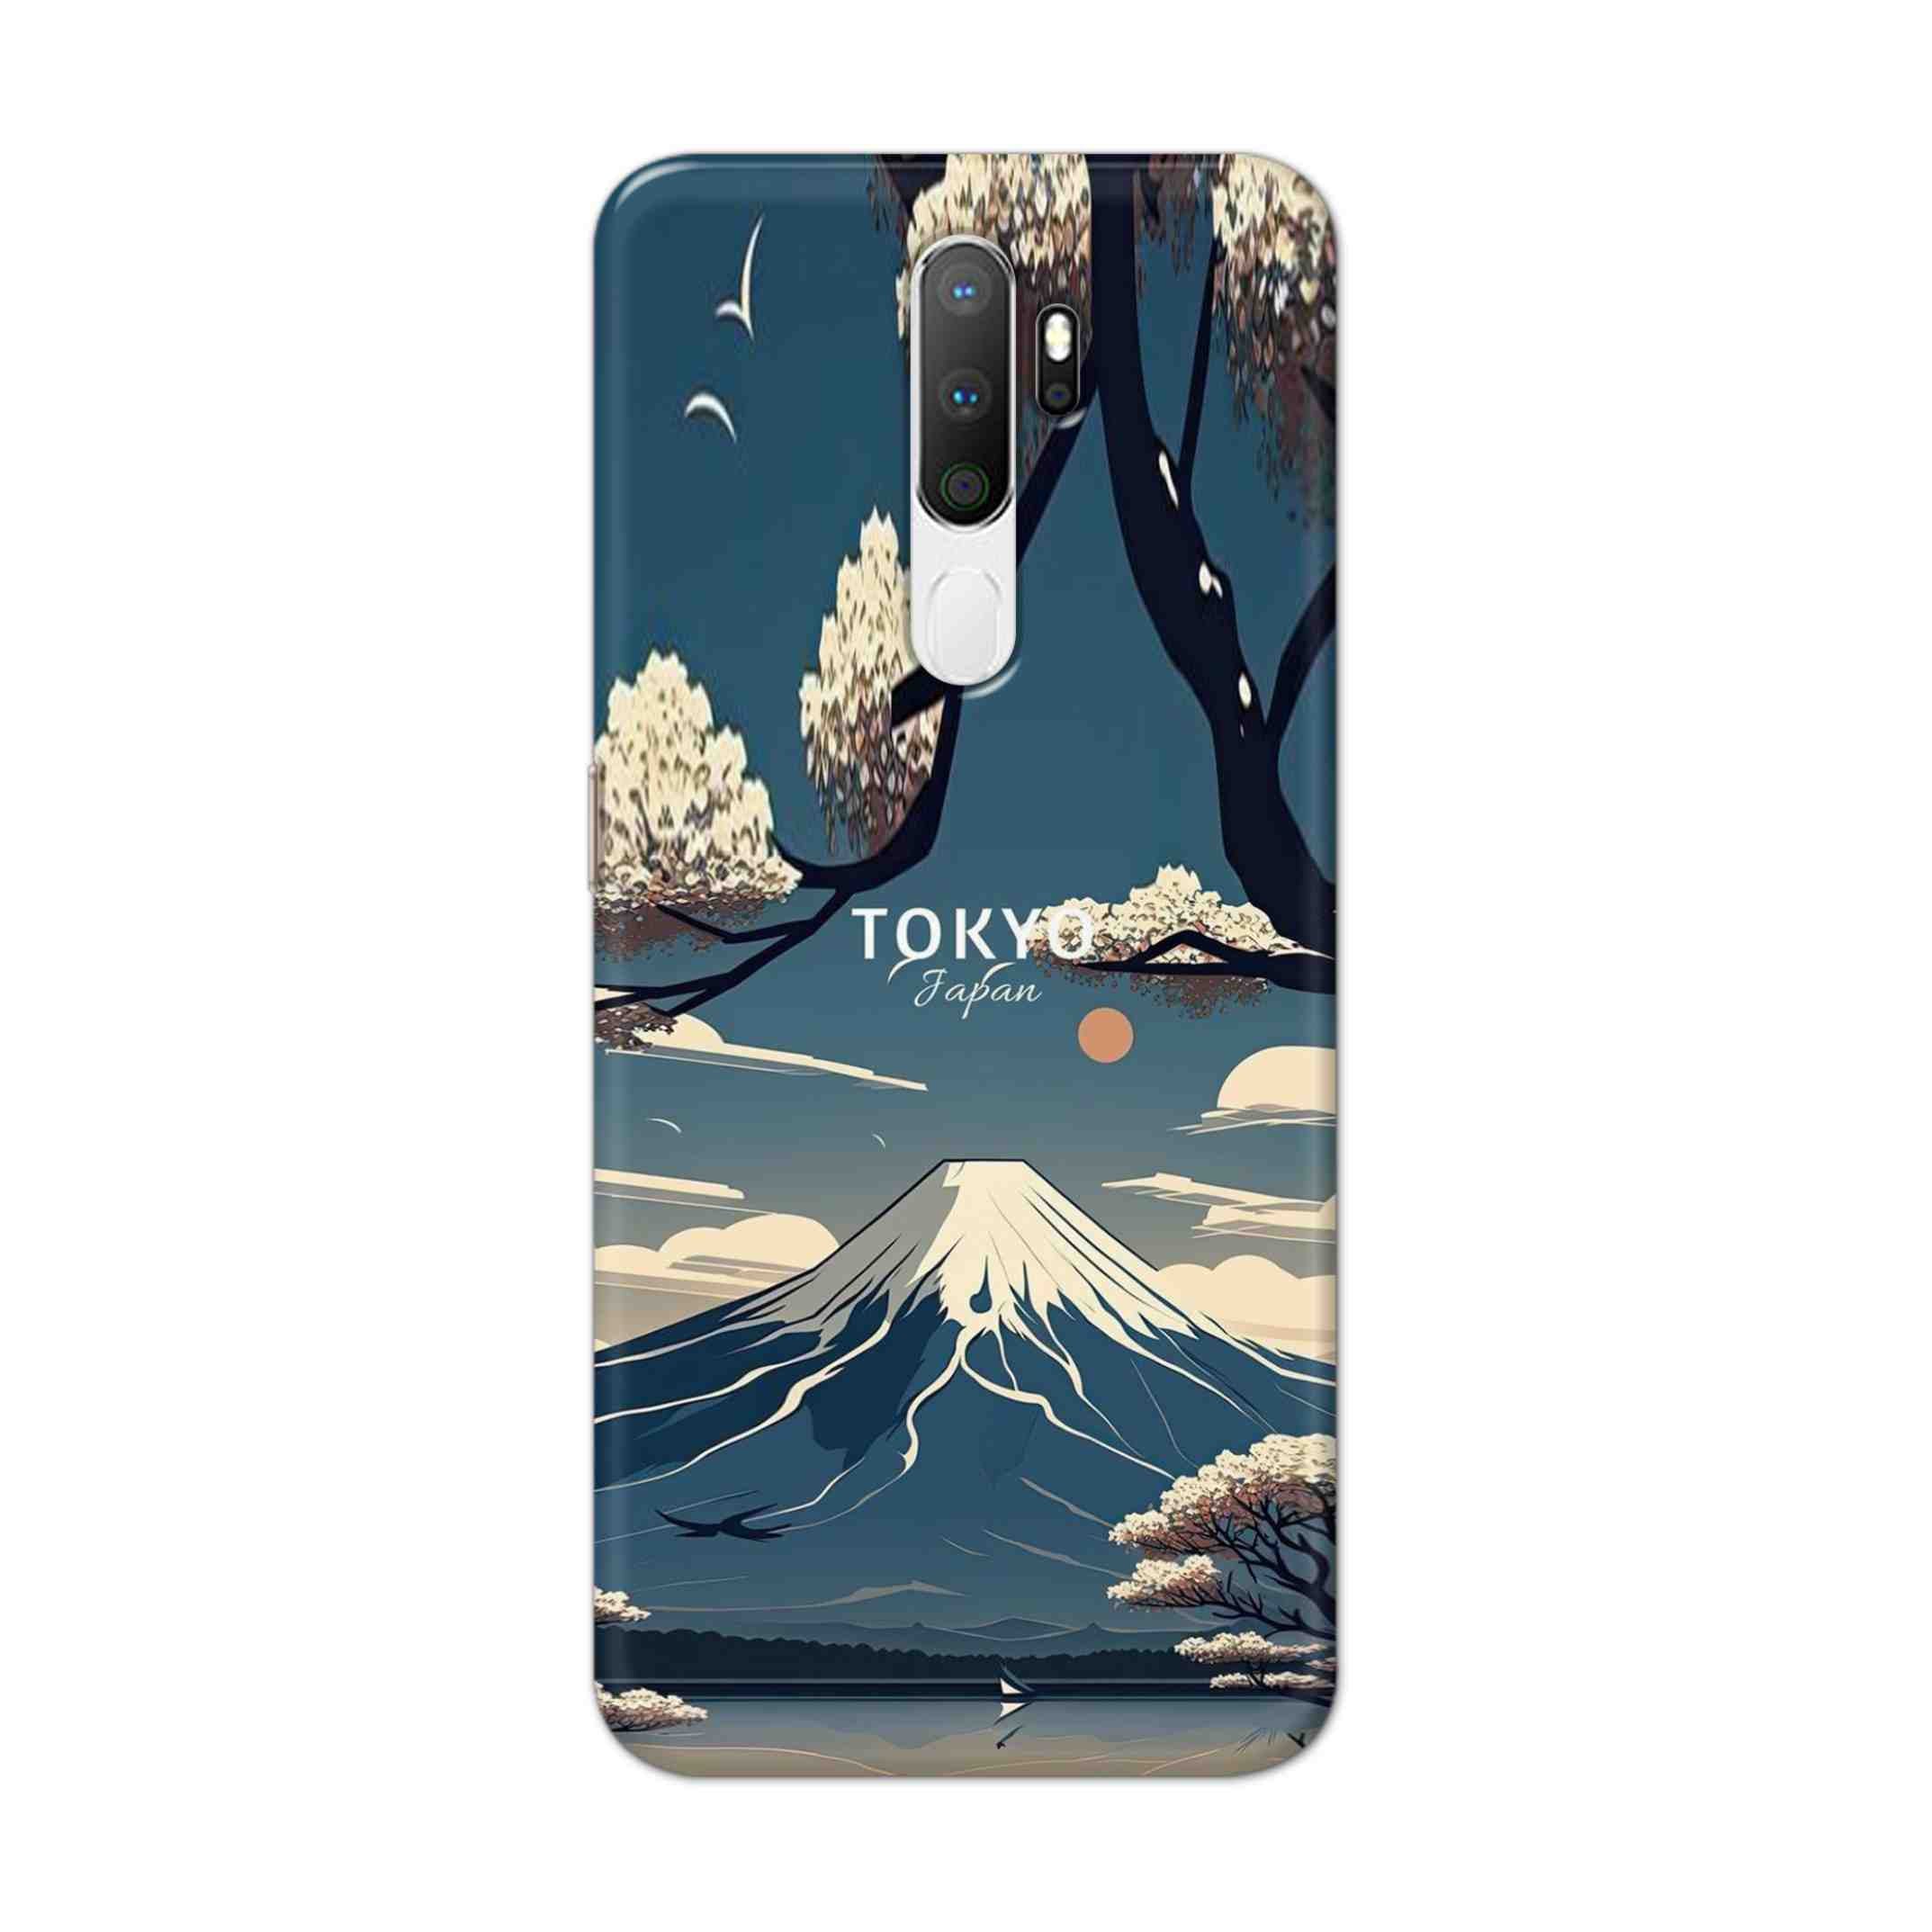 Buy Tokyo Hard Back Mobile Phone Case Cover For Oppo A5 (2020) Online